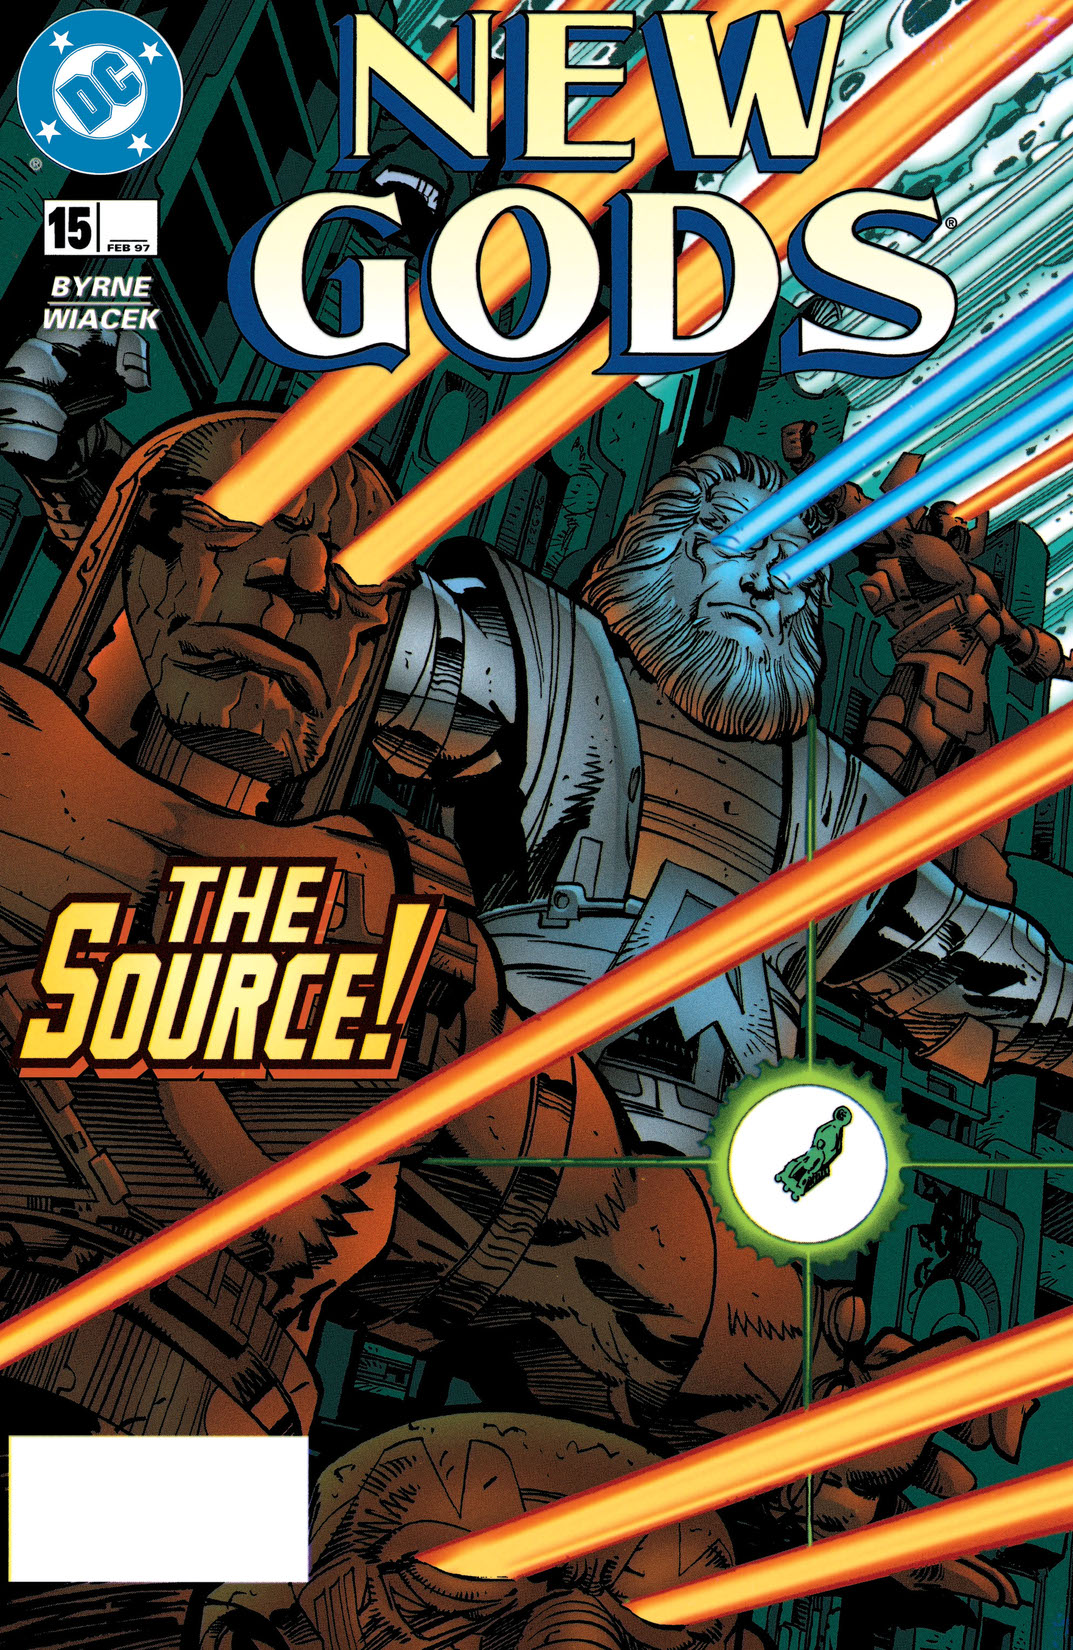 New Gods (1995-) #15 preview images